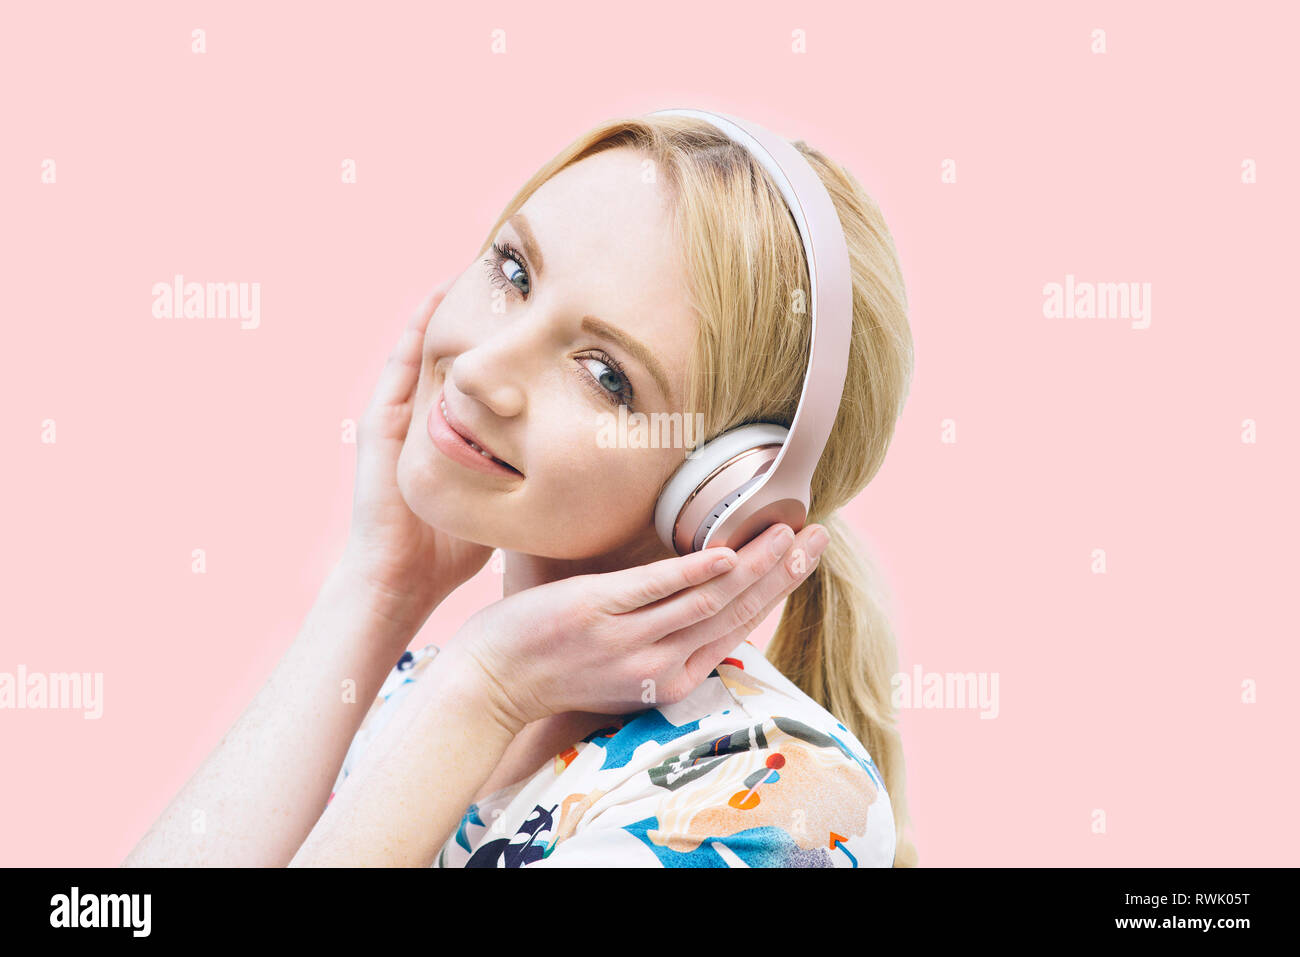 Front view of a young Caucasian girl with headphones on and listening to music on a pink background Stock Photo